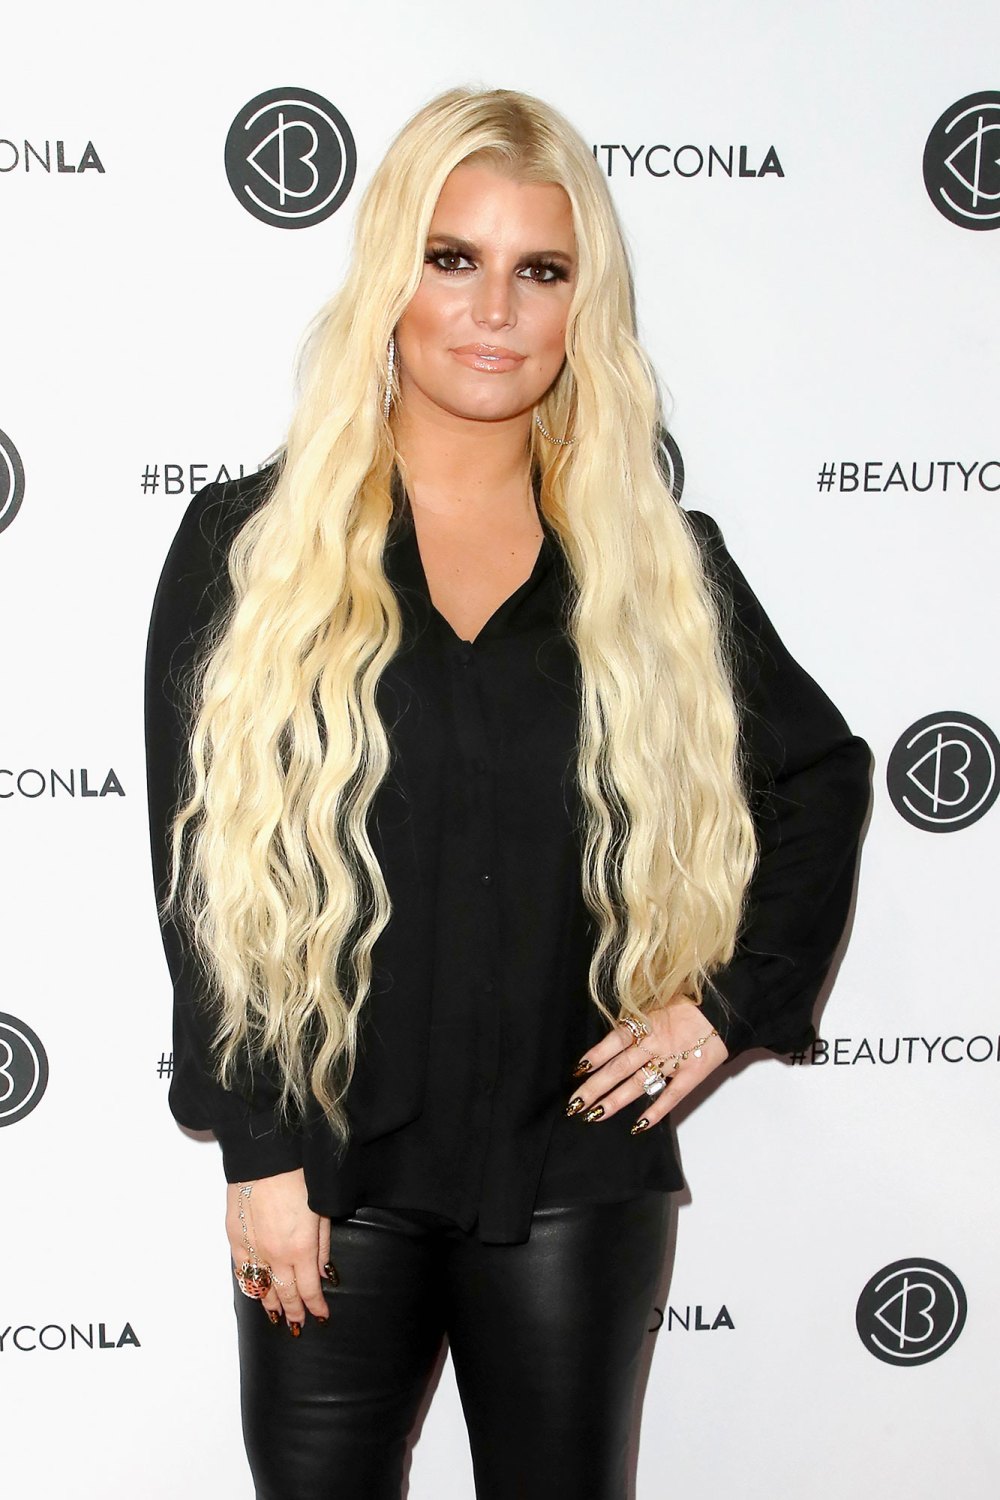 Jessica Simpson Sobriety Journey in Her Own Words 3